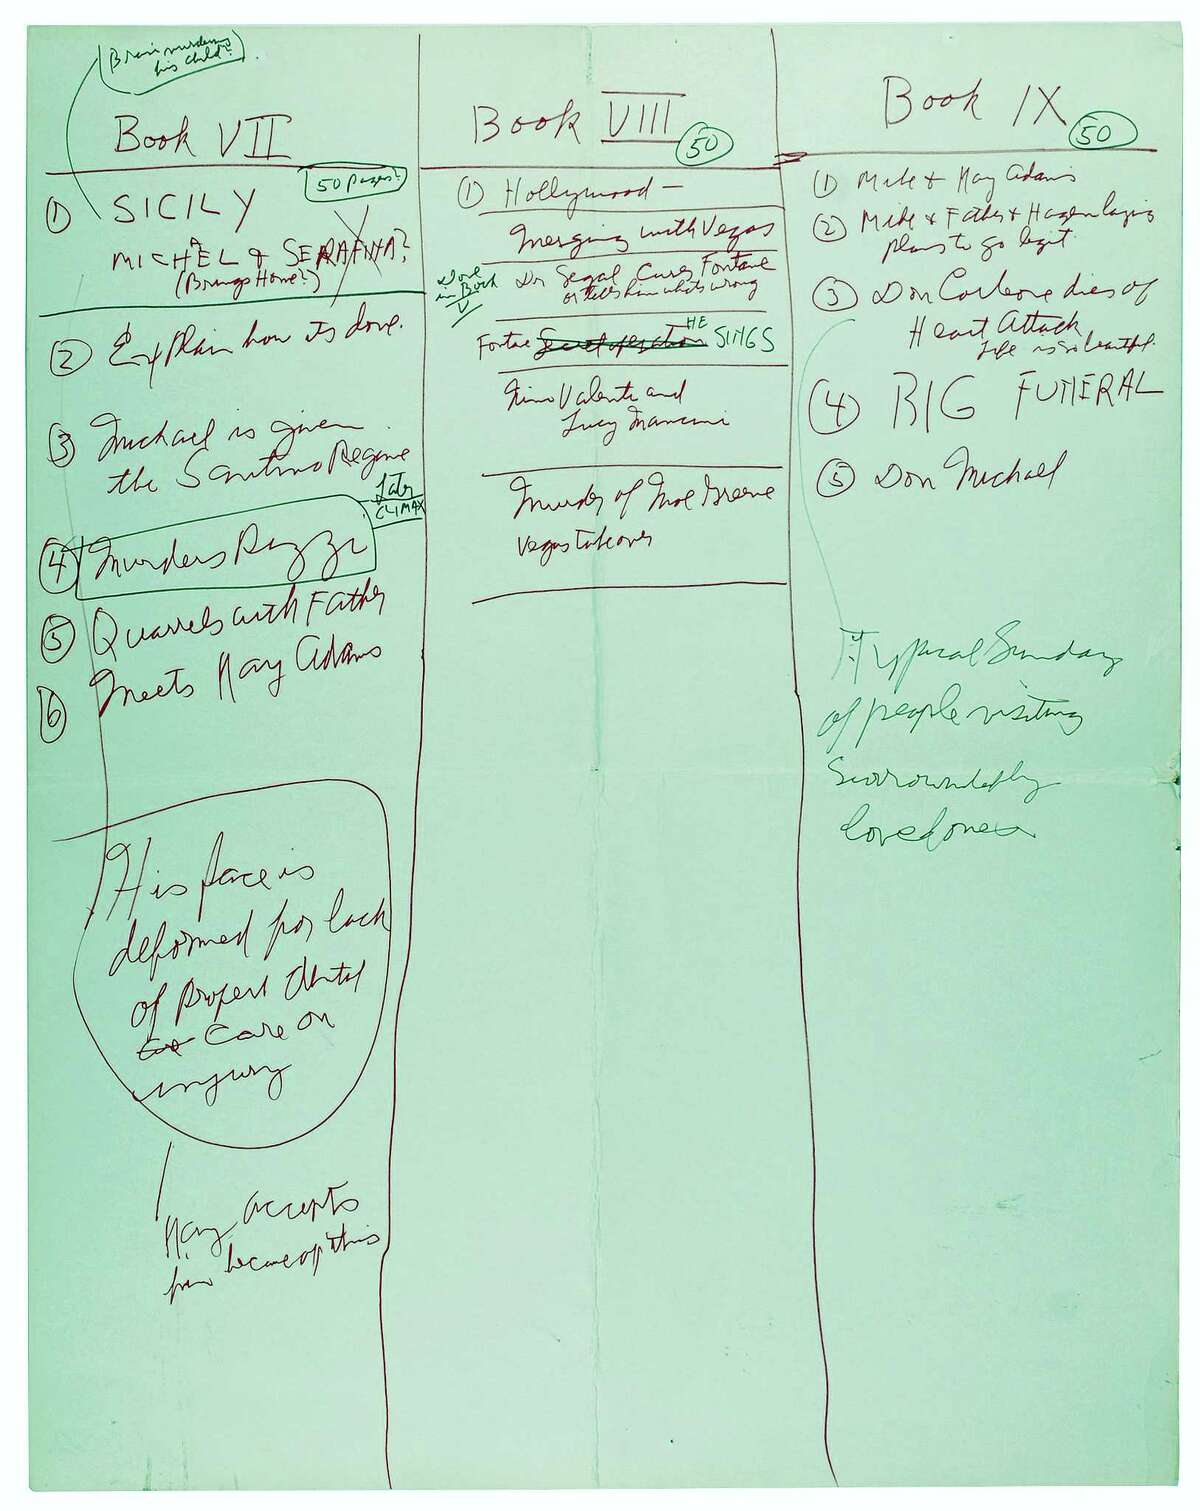 This August 2015 photo provided by RR Auction shows a large outline of chapters 7, 8, and 9 of Mario Puzo’s “The Godfather,” covering scenes in Sicily and Las Vegas, Vito Corleone’s death, and his son Michael’s ascension as godfather. The outline is part of a large collection of Puzo’s papers to be auctioned by Boston-based RR Auction on Feb. 18, 2016. The collection covers Puzo’s entire career, but is highlighted by thousands of pages of “The Godfather” novel and screenplay, including multiple drafts with handwritten revisions.